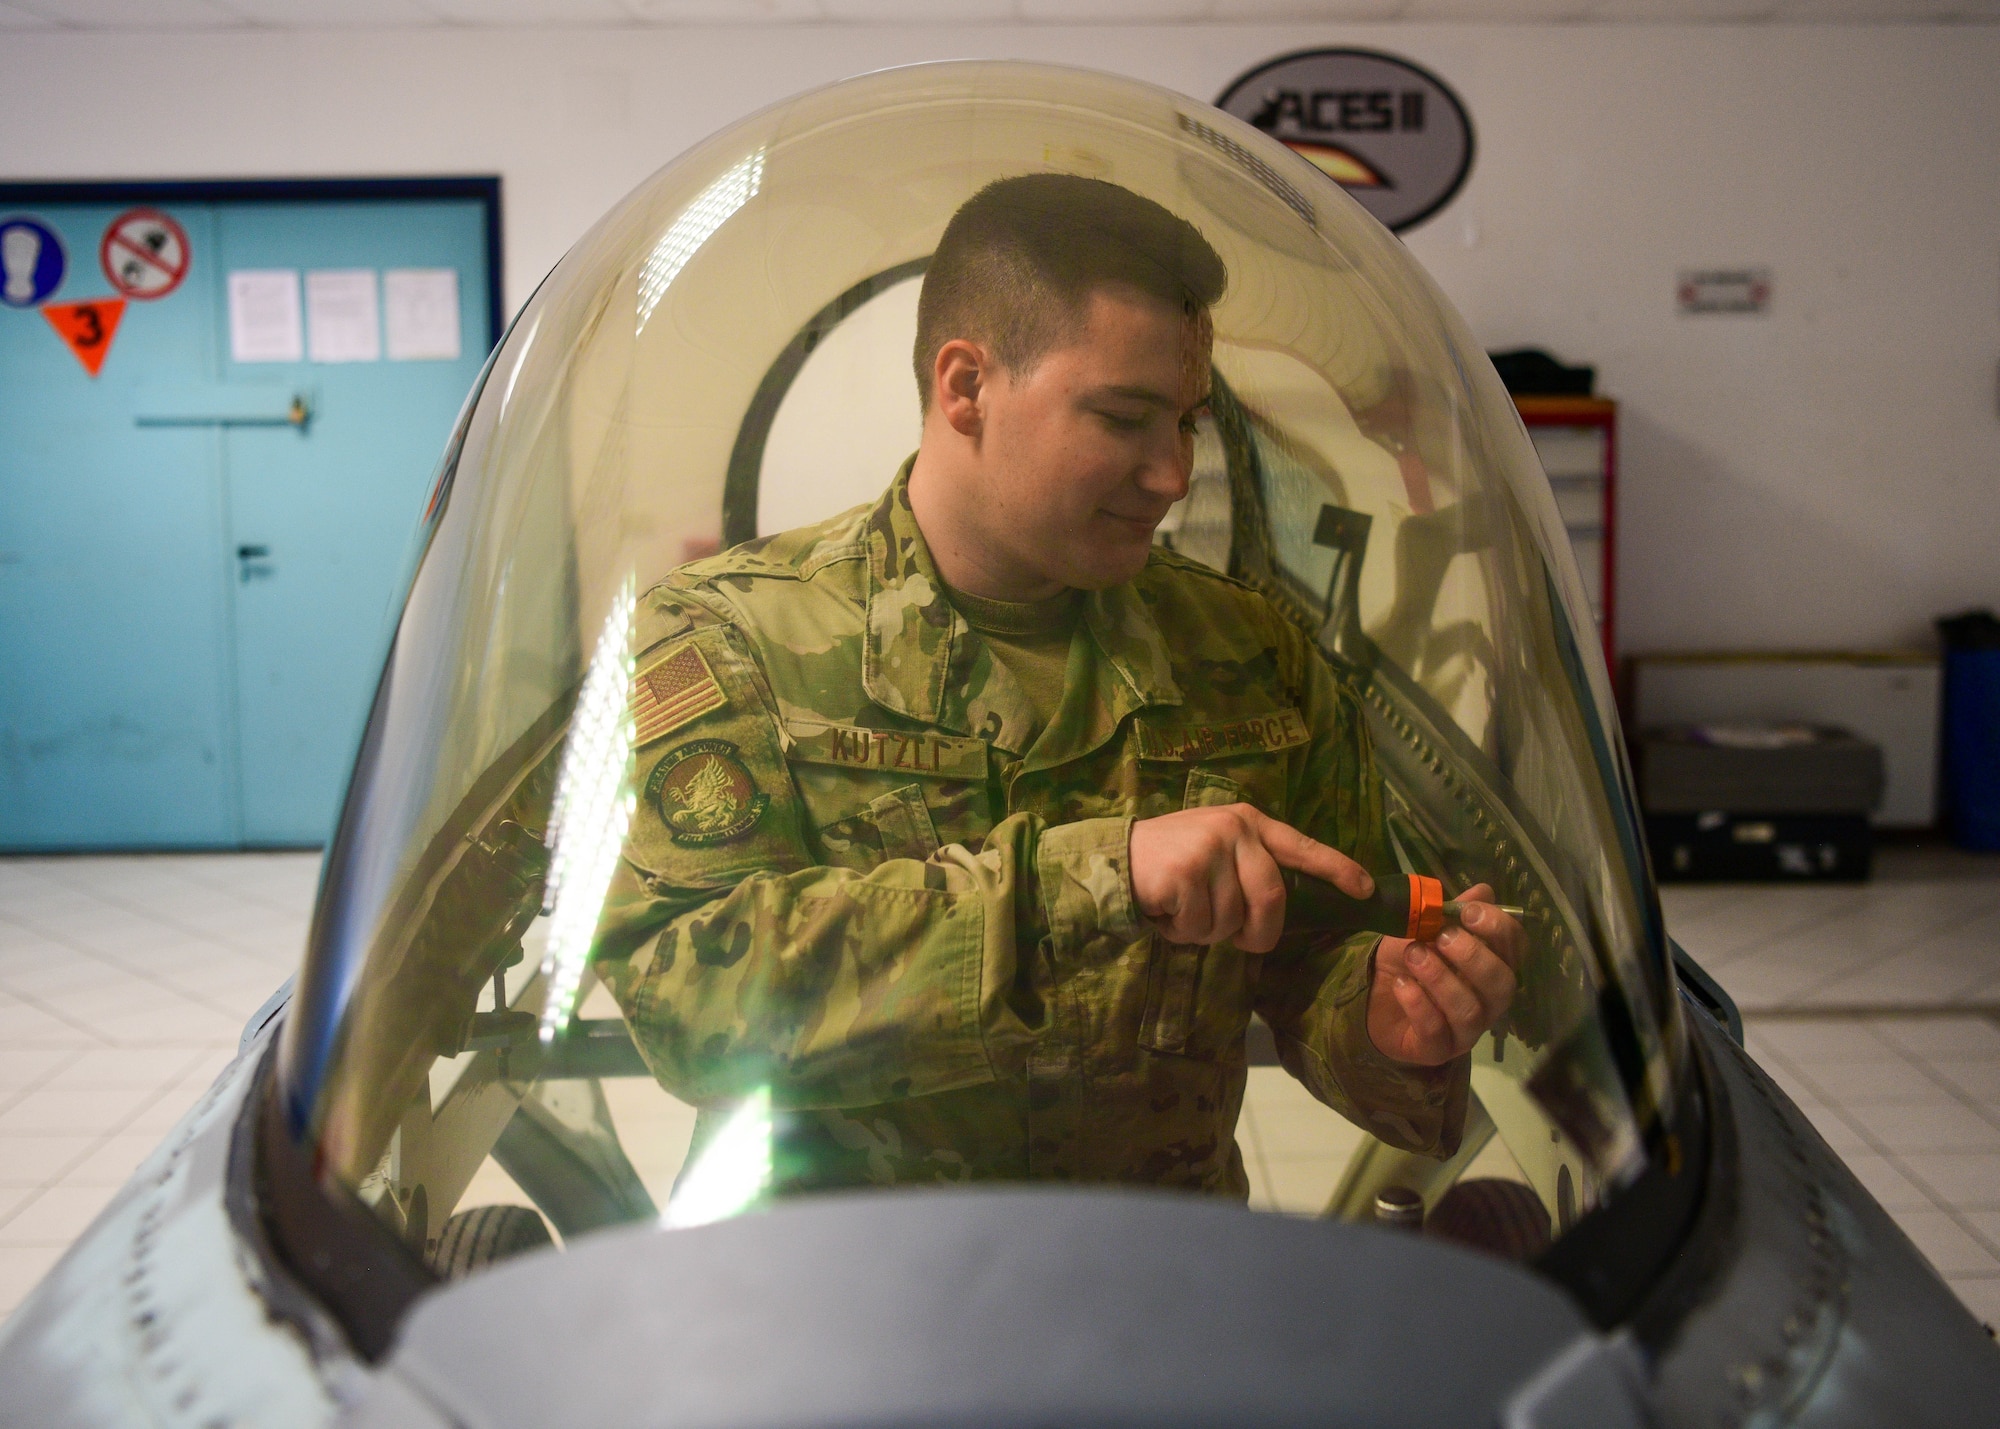 Senior Airman Reece Kutzli, 31st Maintenance Squadron Egress journeyman, screws bolts into an F-16 Fighting Falcon canopy at Aviano Air Base, Italy, Aug. 10, 2022. Aviano was chosen as one of six bases across multiple major commands that have different environmental factors to test a new Luna transparency for the F-16 canopy. (U.S. Air Force photo by Senior Airman Brooke Moeder)